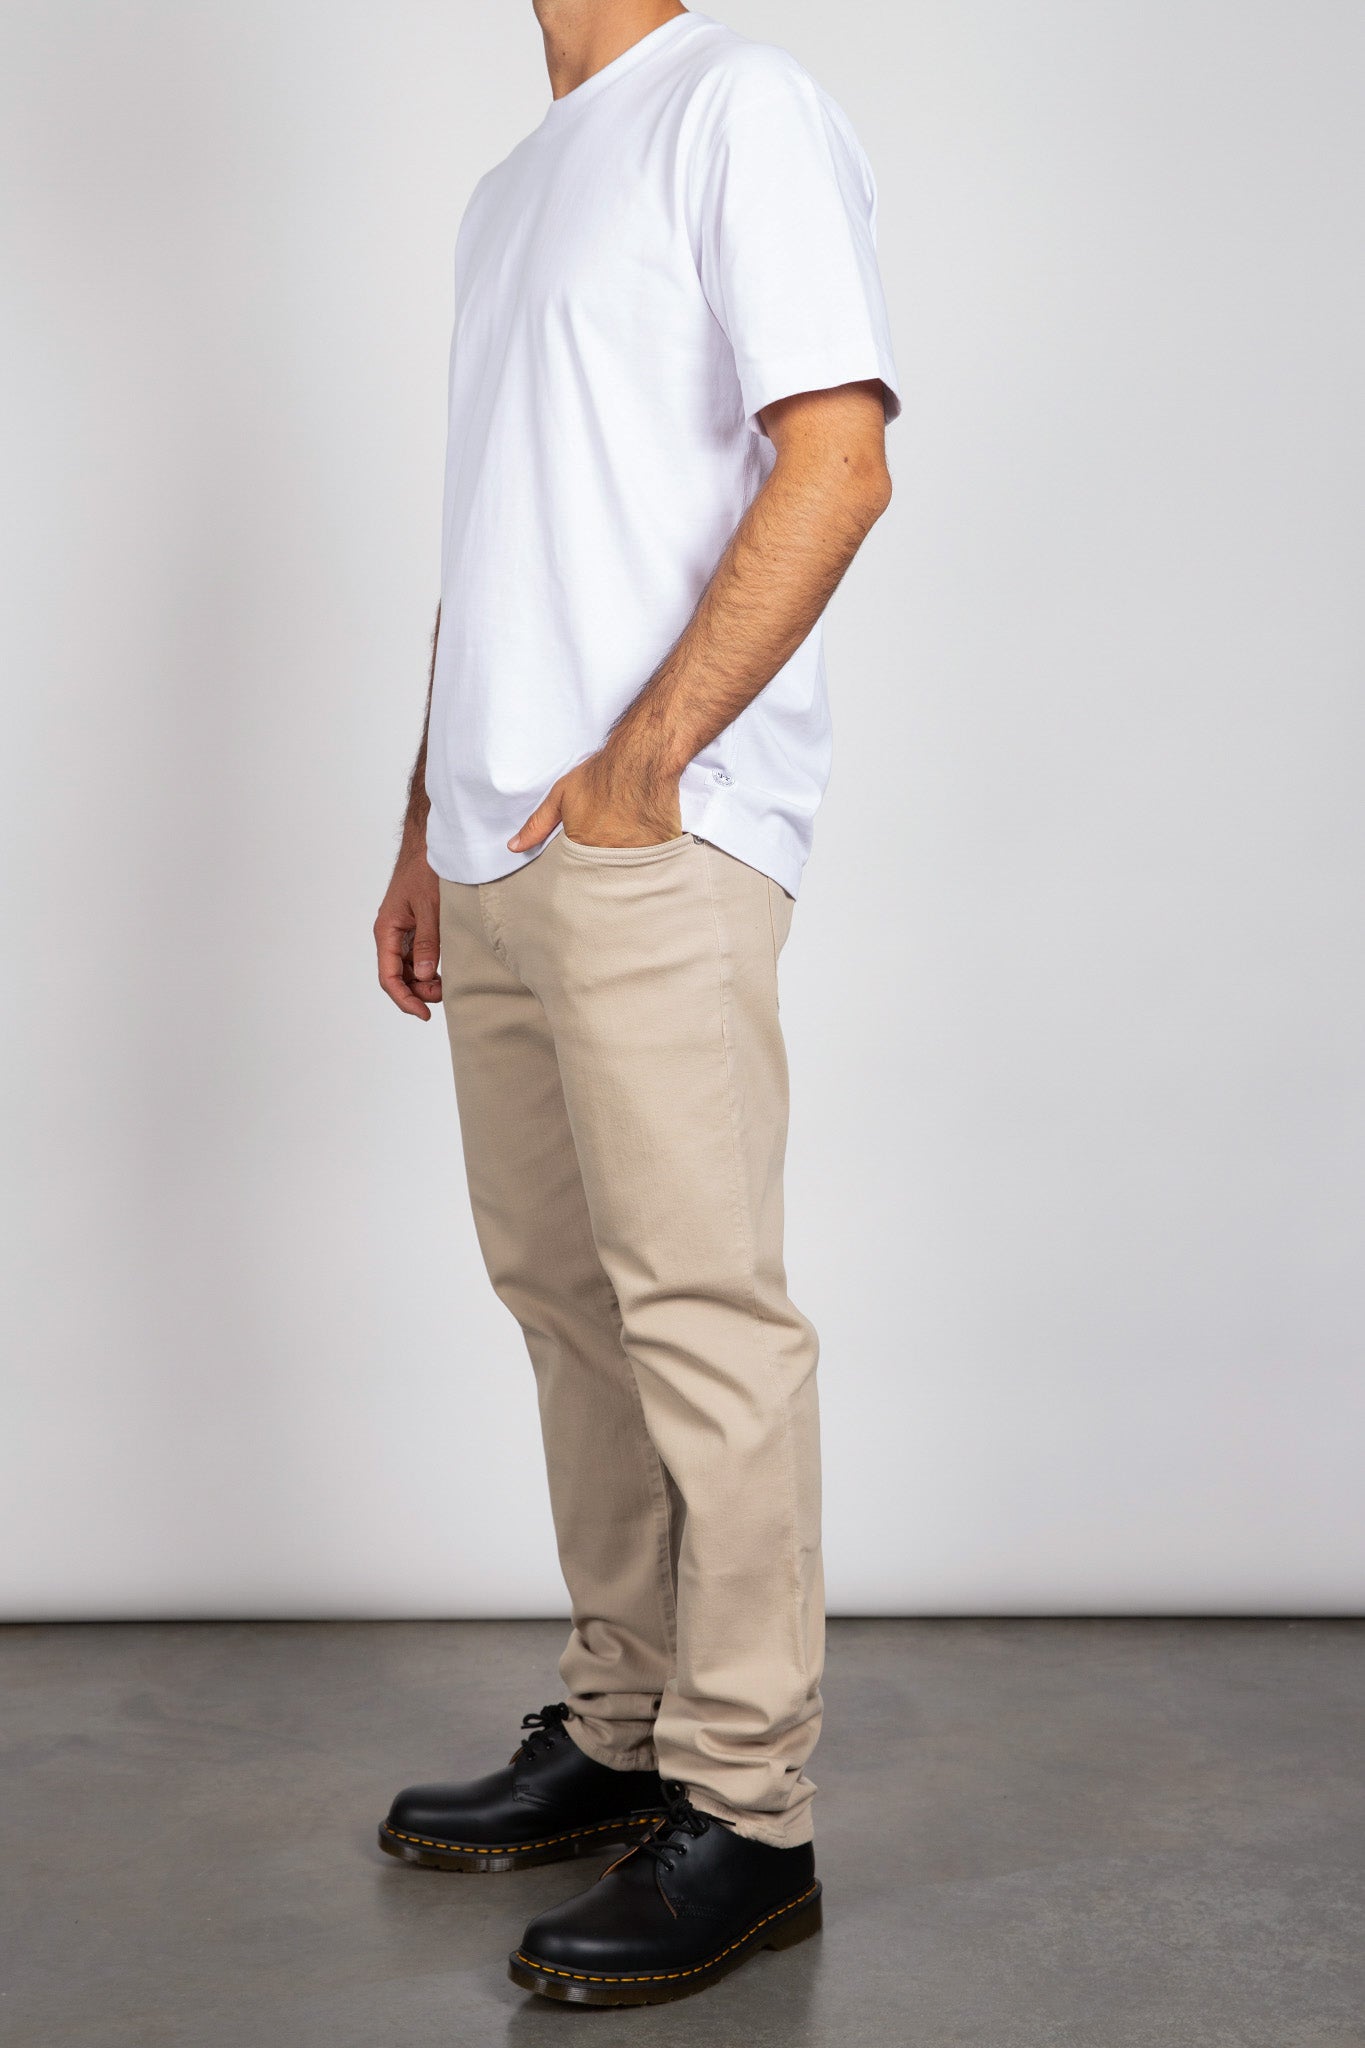 Adler Tapered Classic Soft Weft Pants Citizens of Humanity   